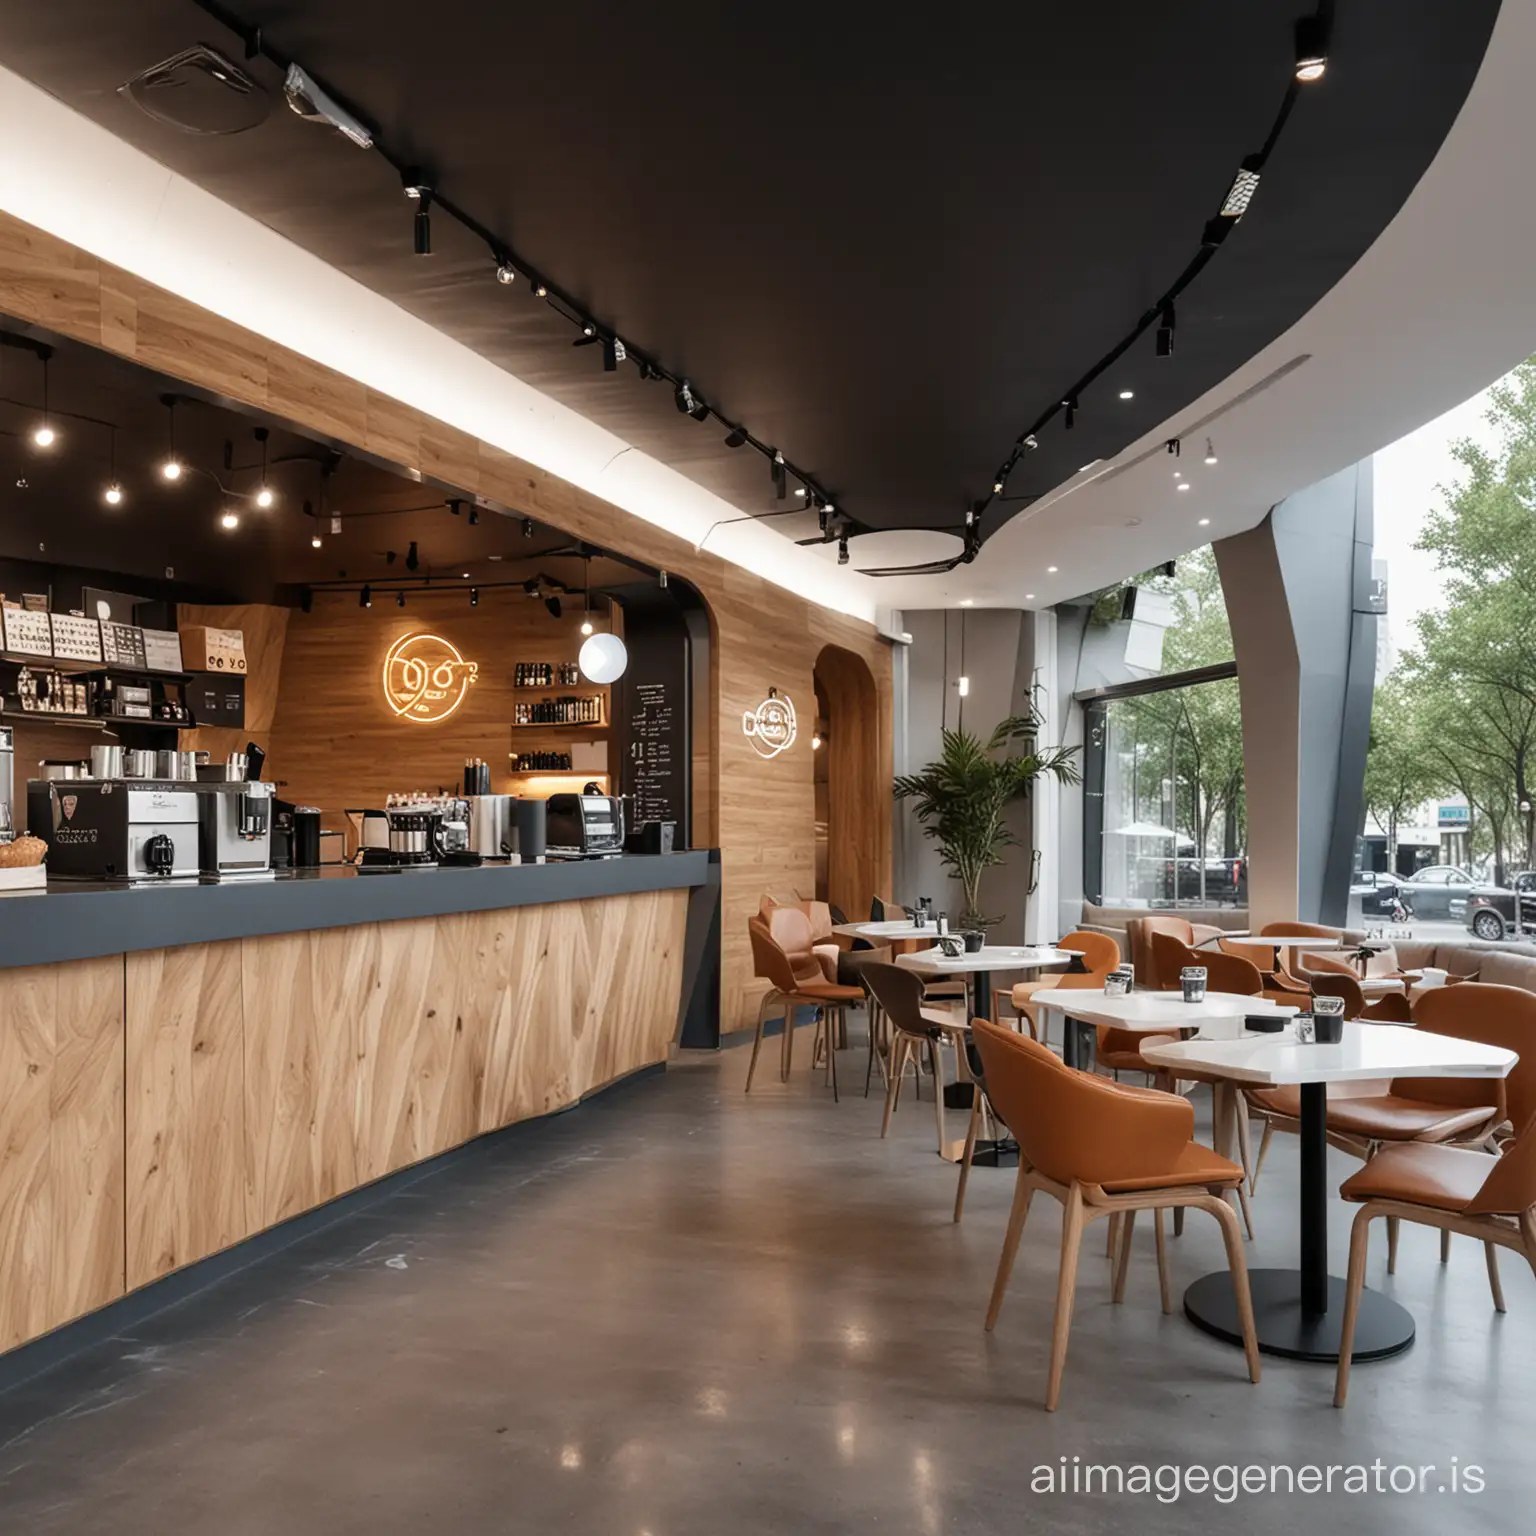 Futuristic-Style-Coffee-Caf-with-a-Cool-Vibe-and-HighTech-Aesthetics